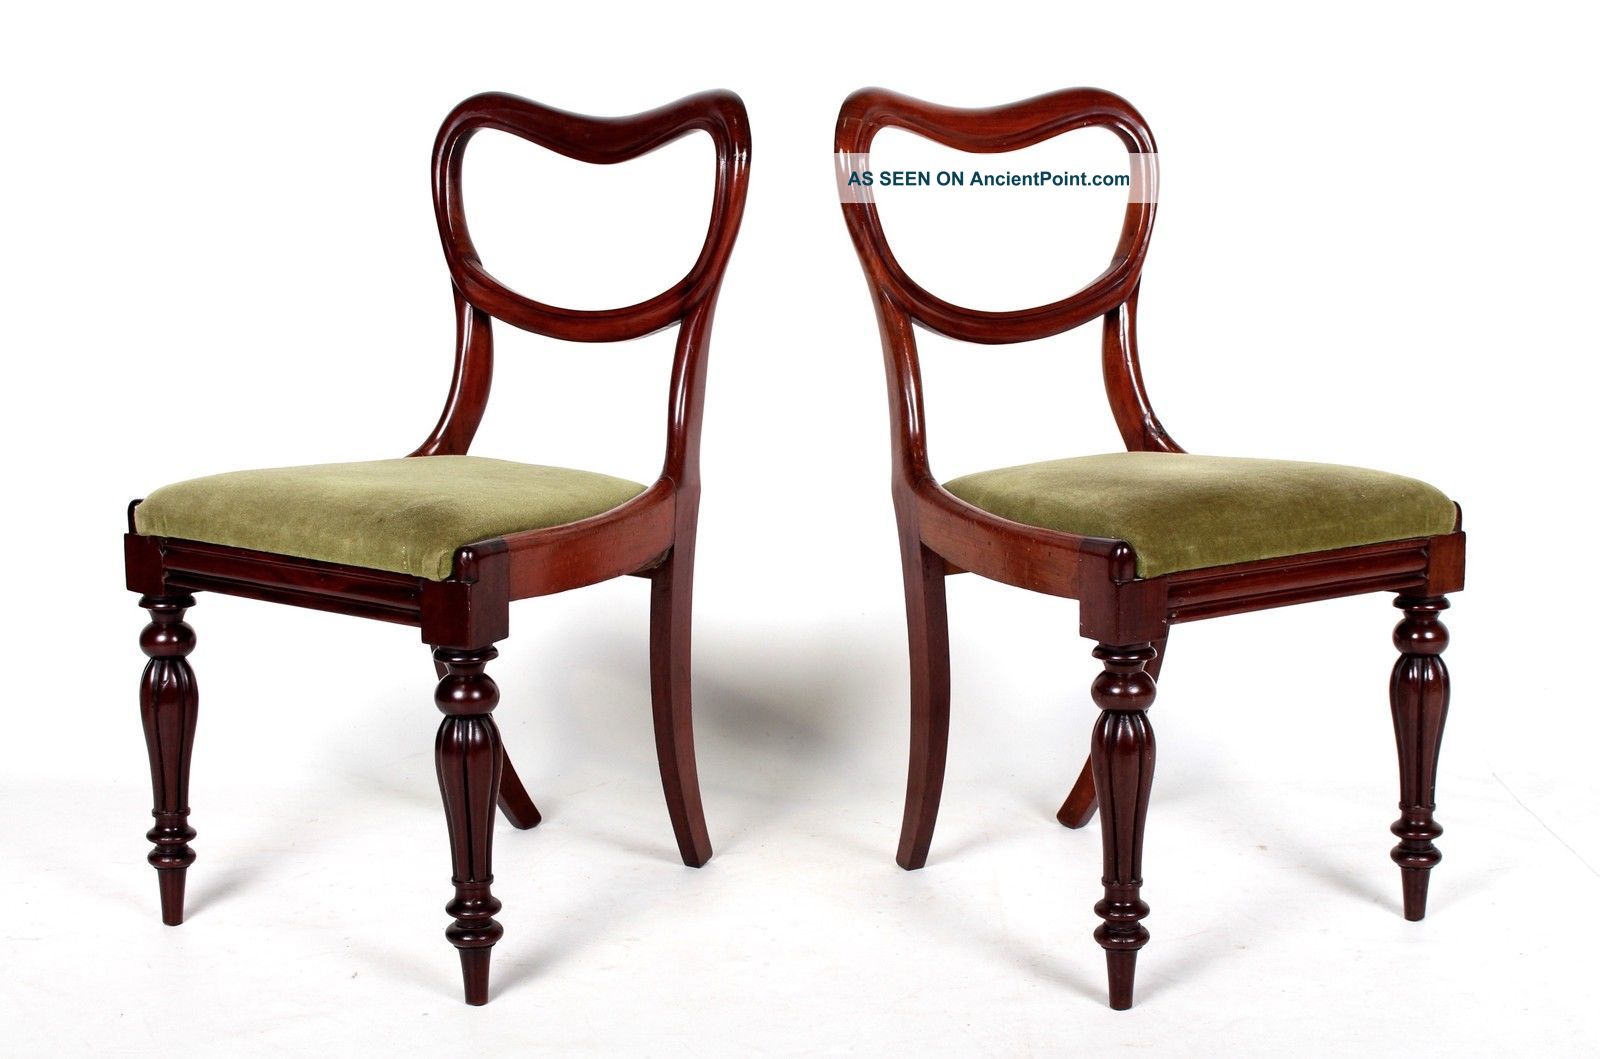 Pair Antique Chairs 2 Victorian Balloon Back Chairs Mahogany 19th Century Side B 1800-1899 photo